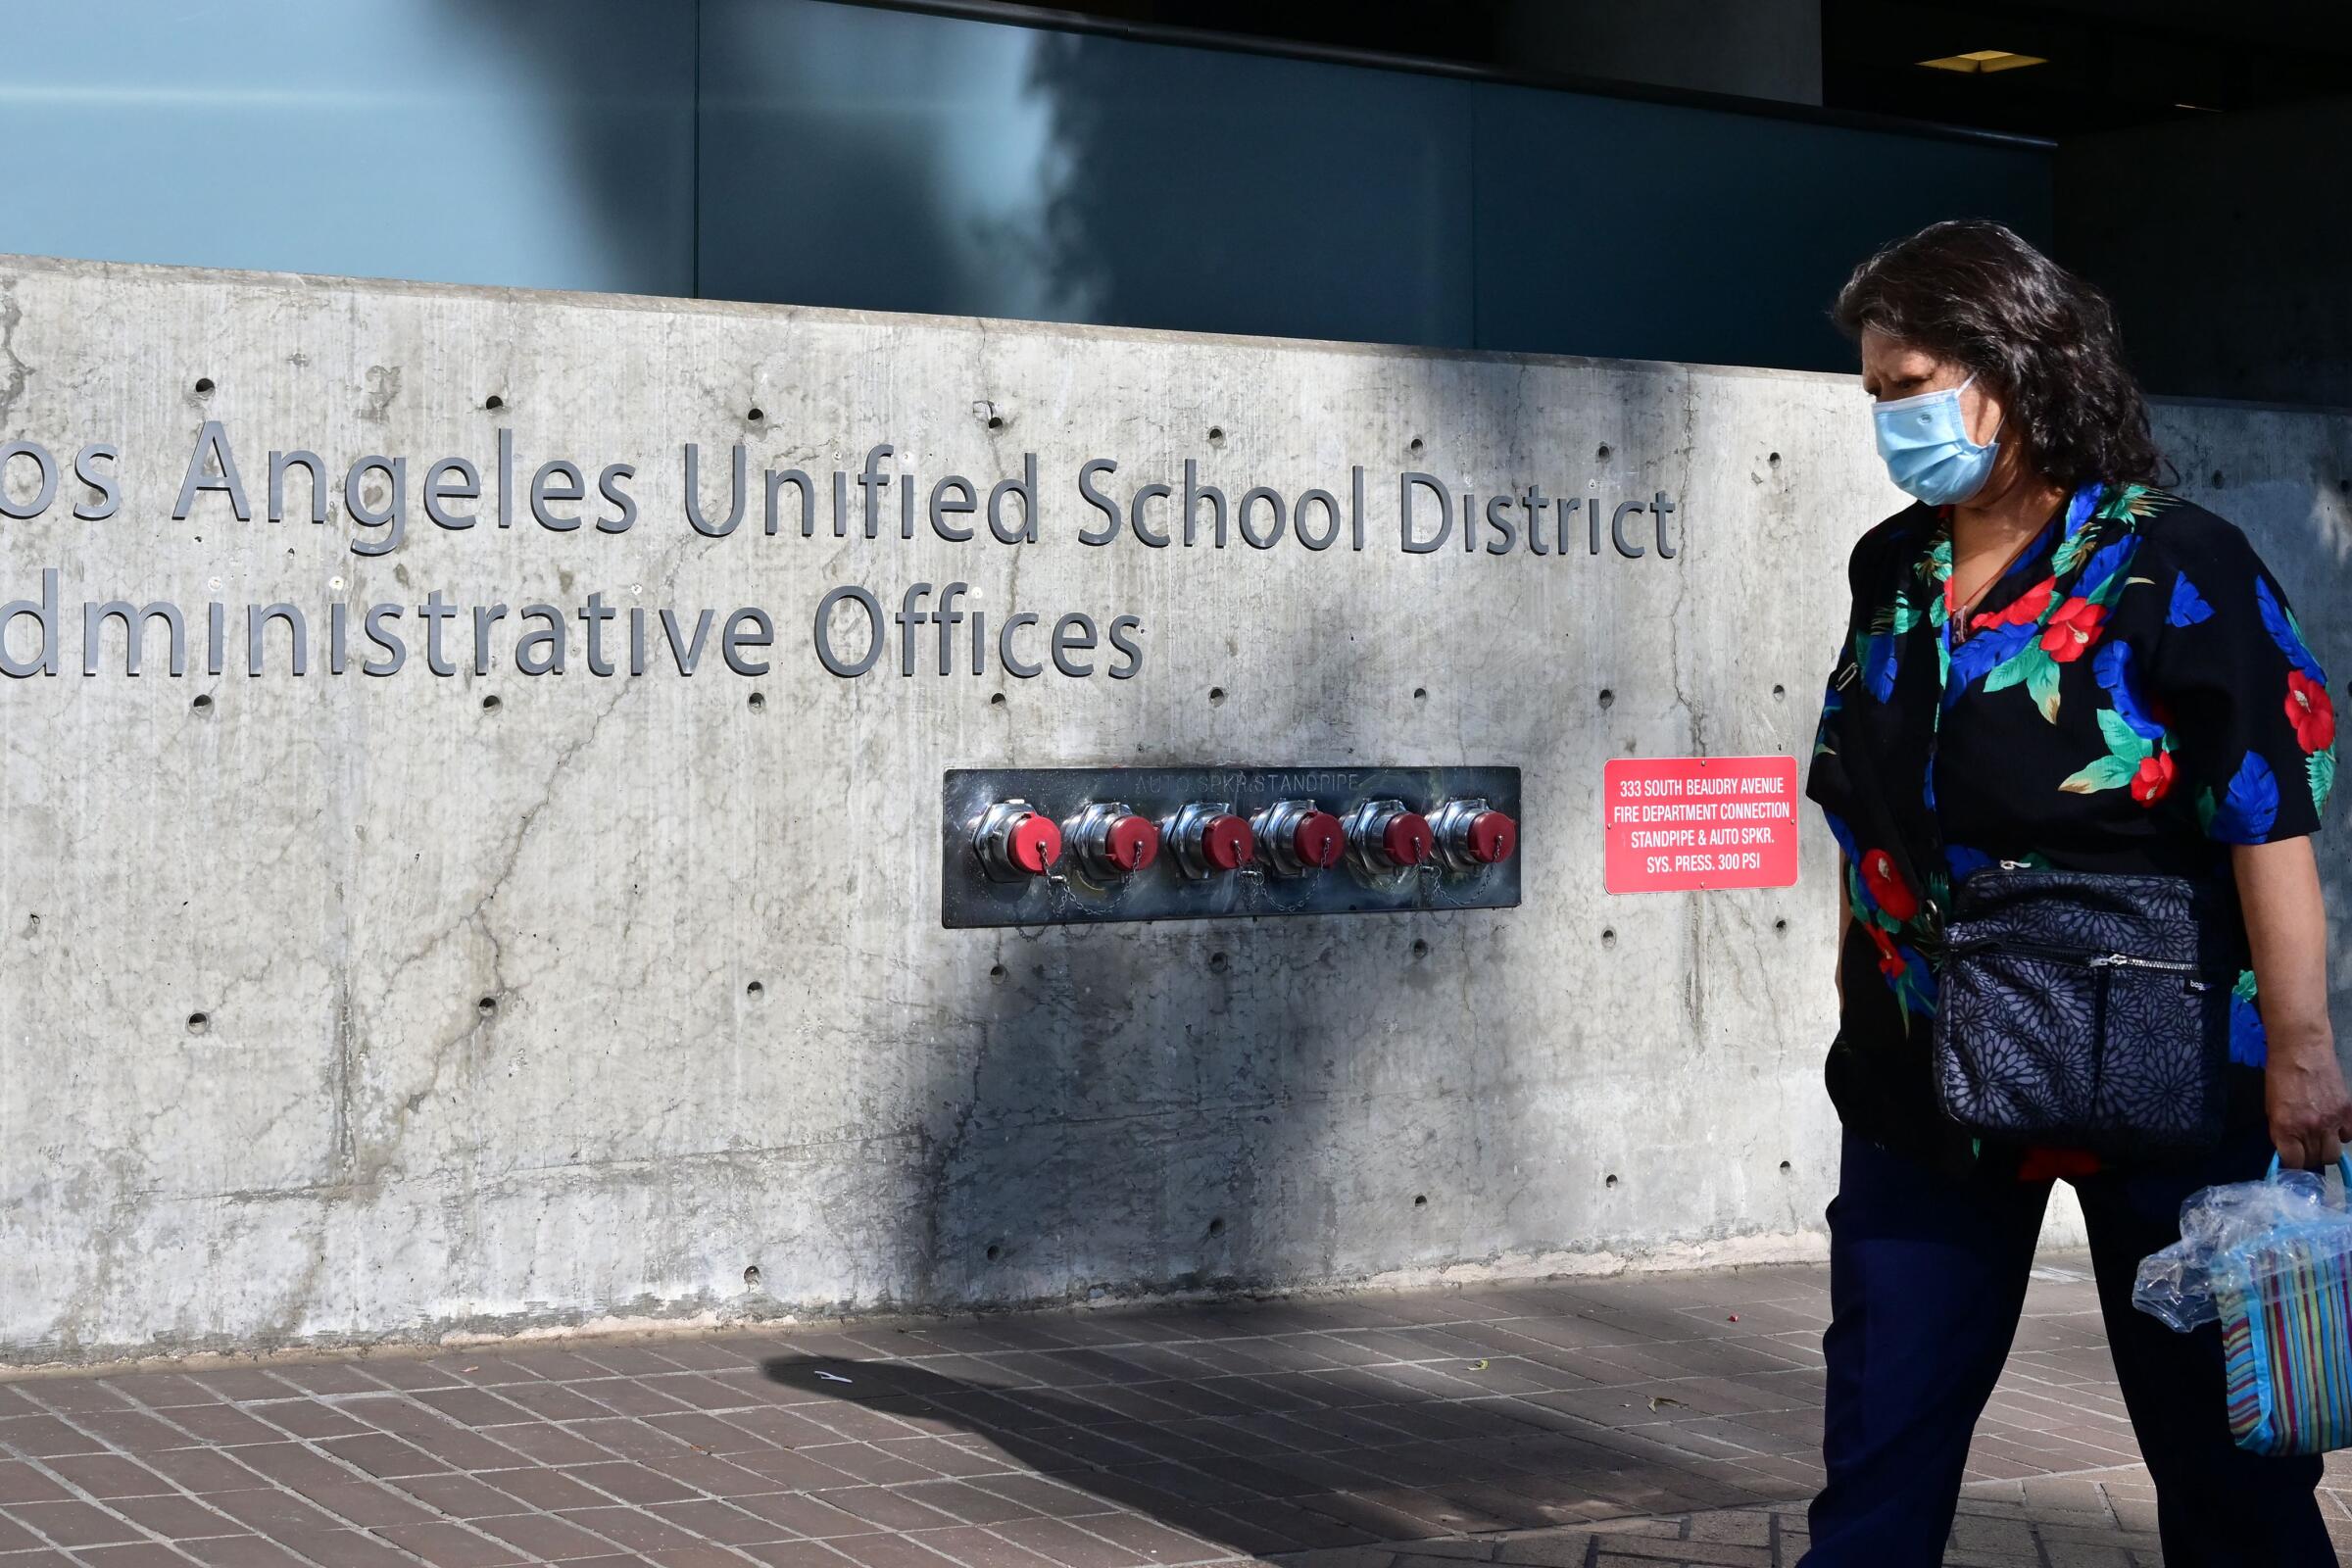 A person walking by L.A. Unified headquarters